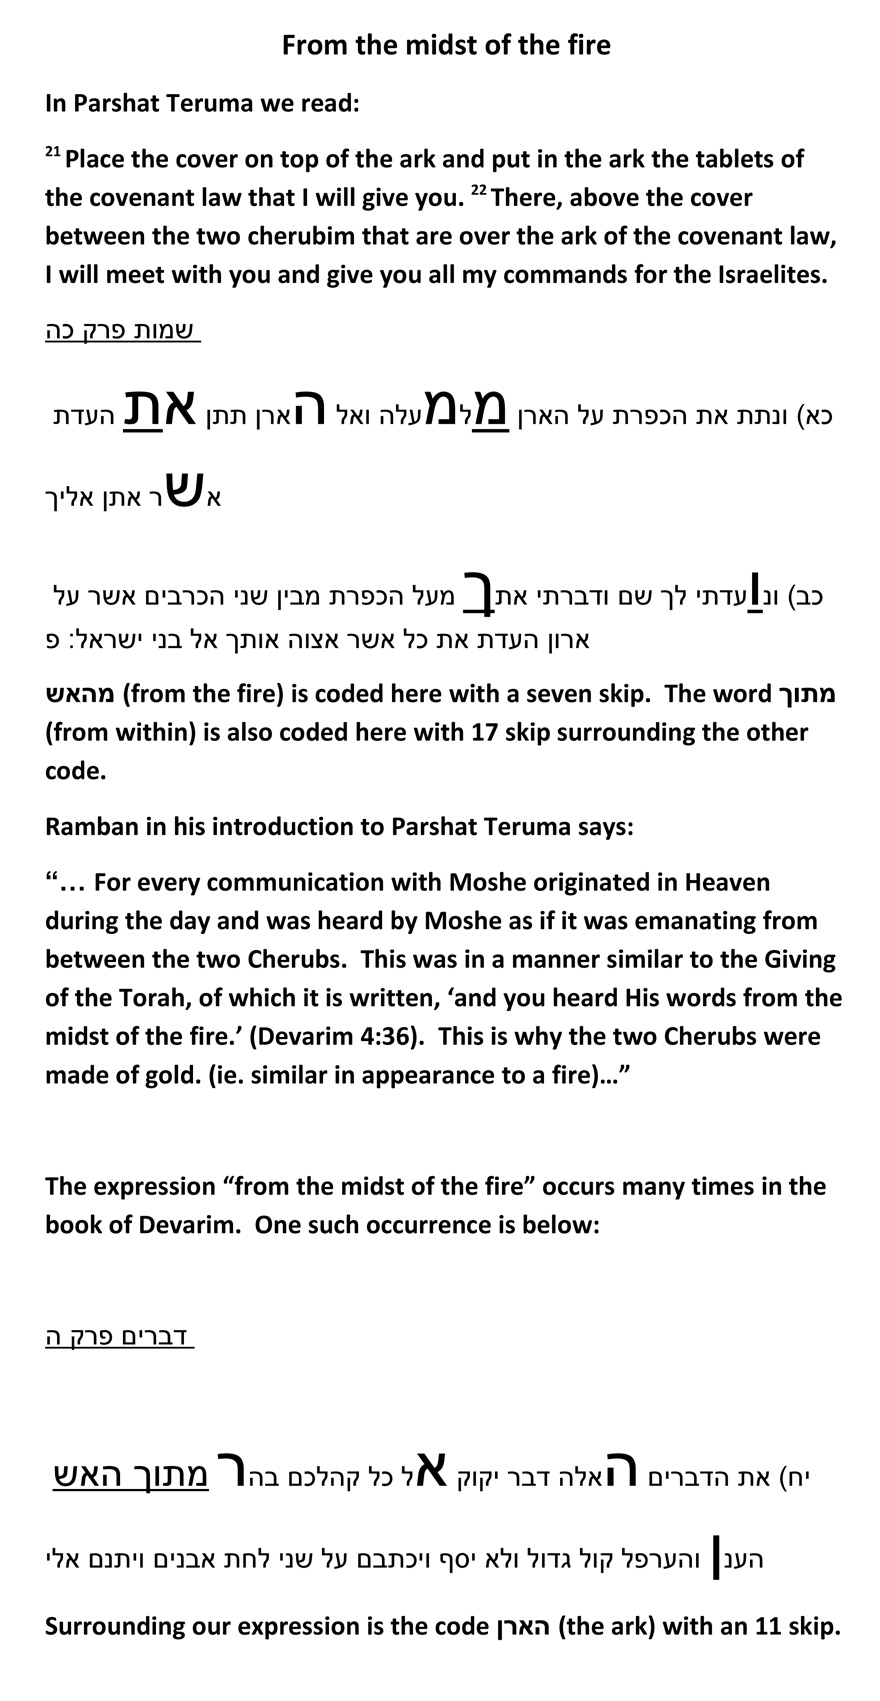 Gematria_Cat-Parshat-Teruma-From-the-midst-of-the-fire